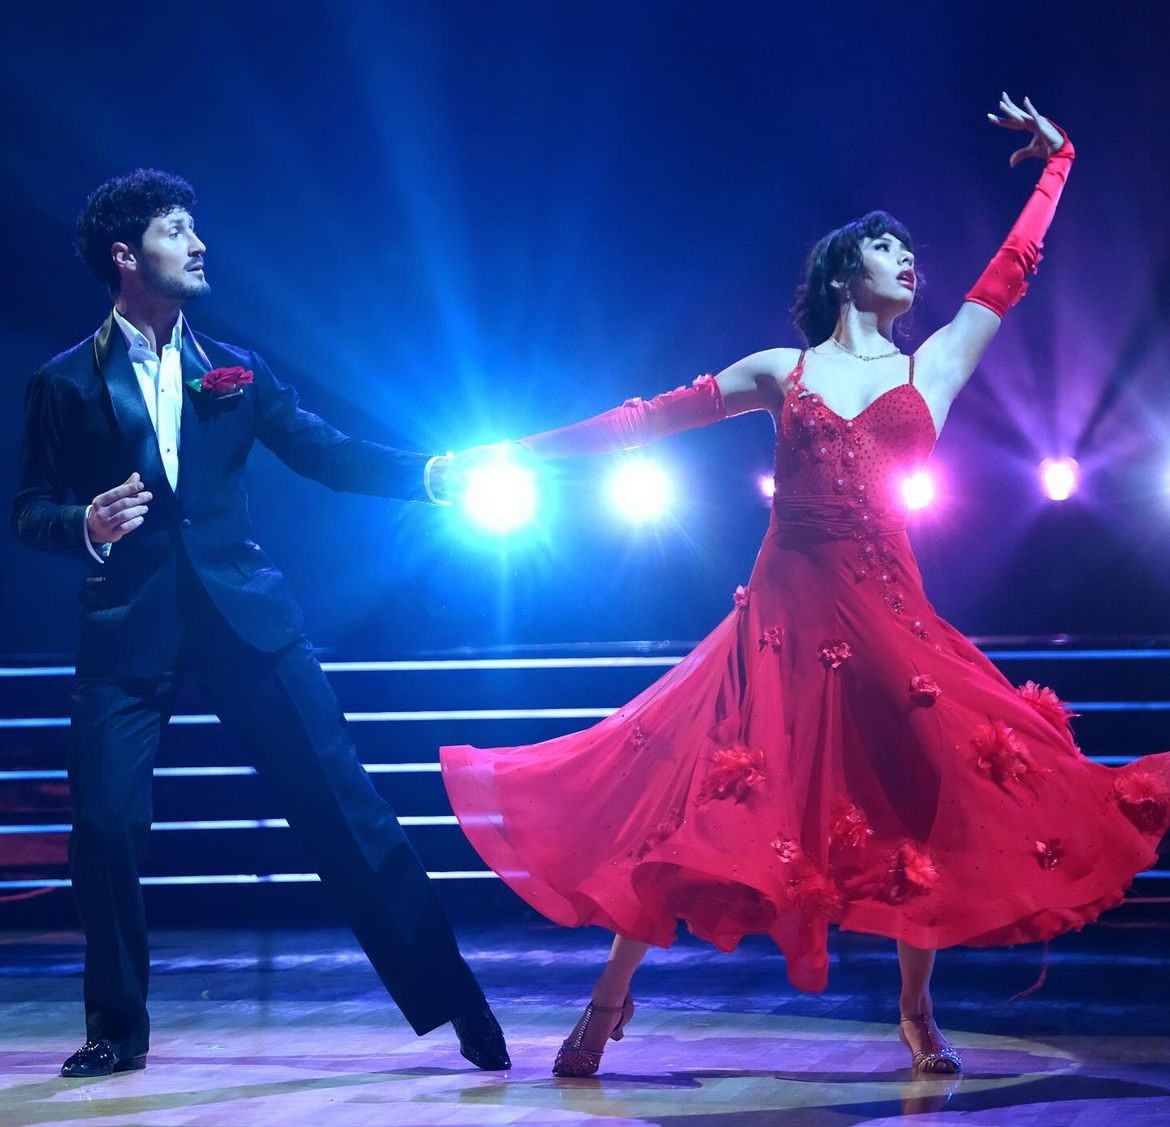 I did not think a dance would make me cry so much. This waltz proved me wrong!